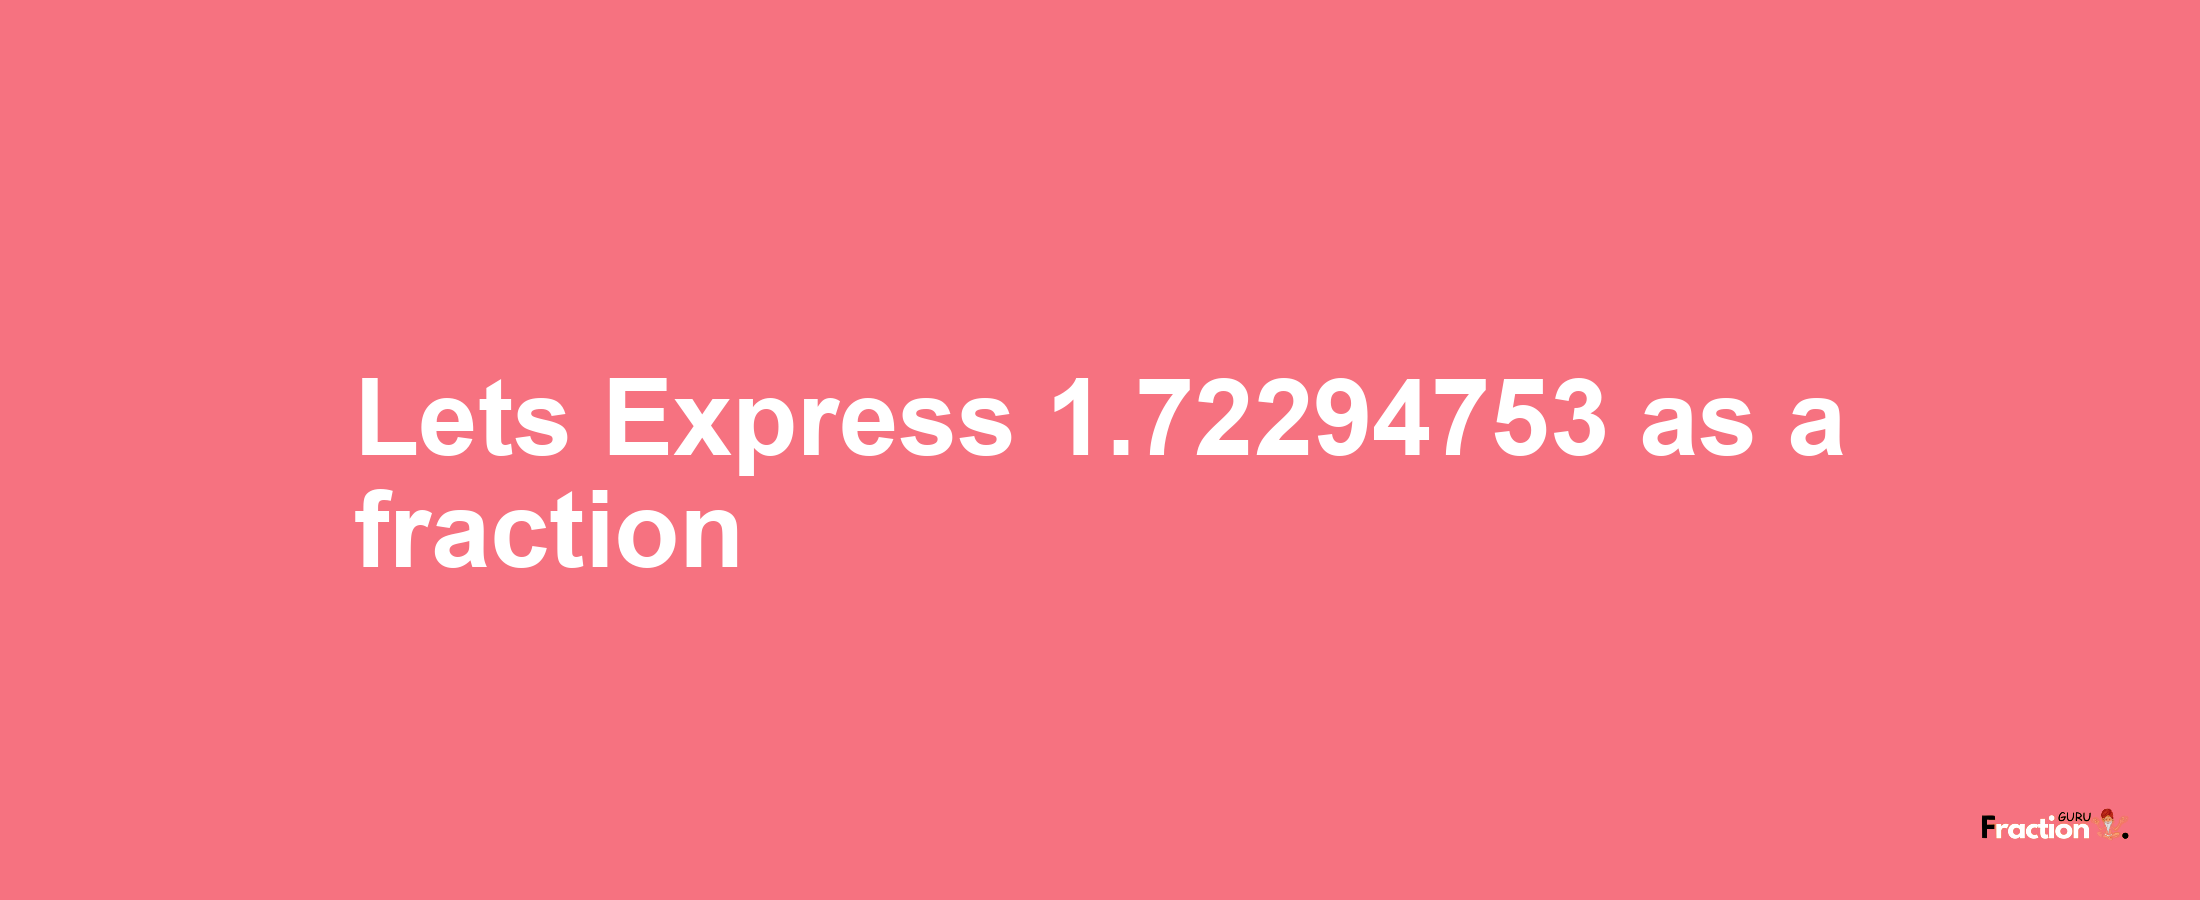 Lets Express 1.72294753 as afraction